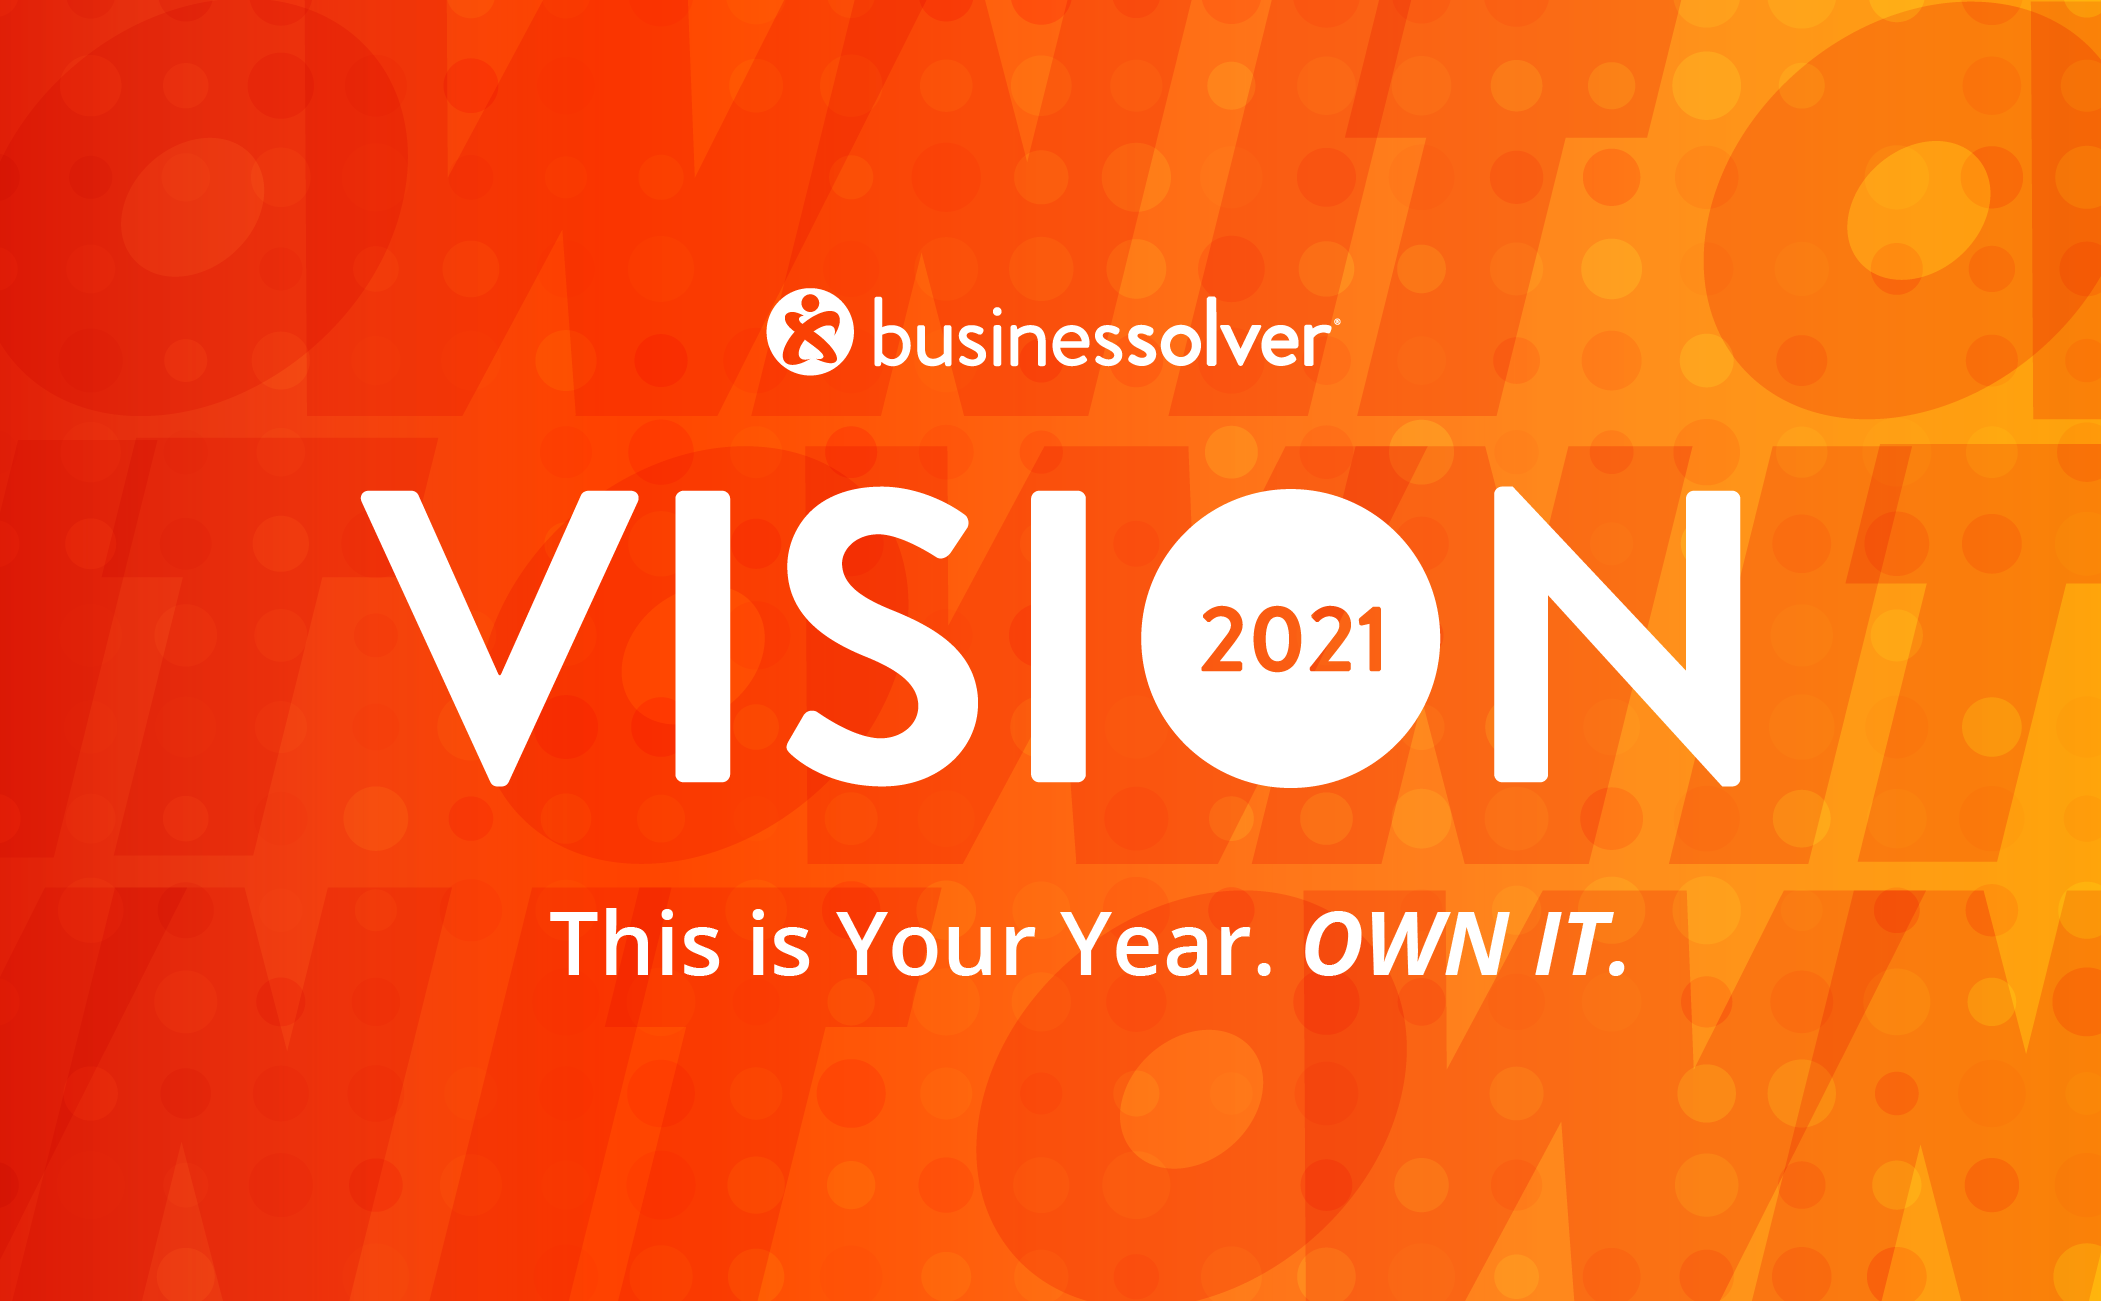 vision-logo-and-tag-with-bg